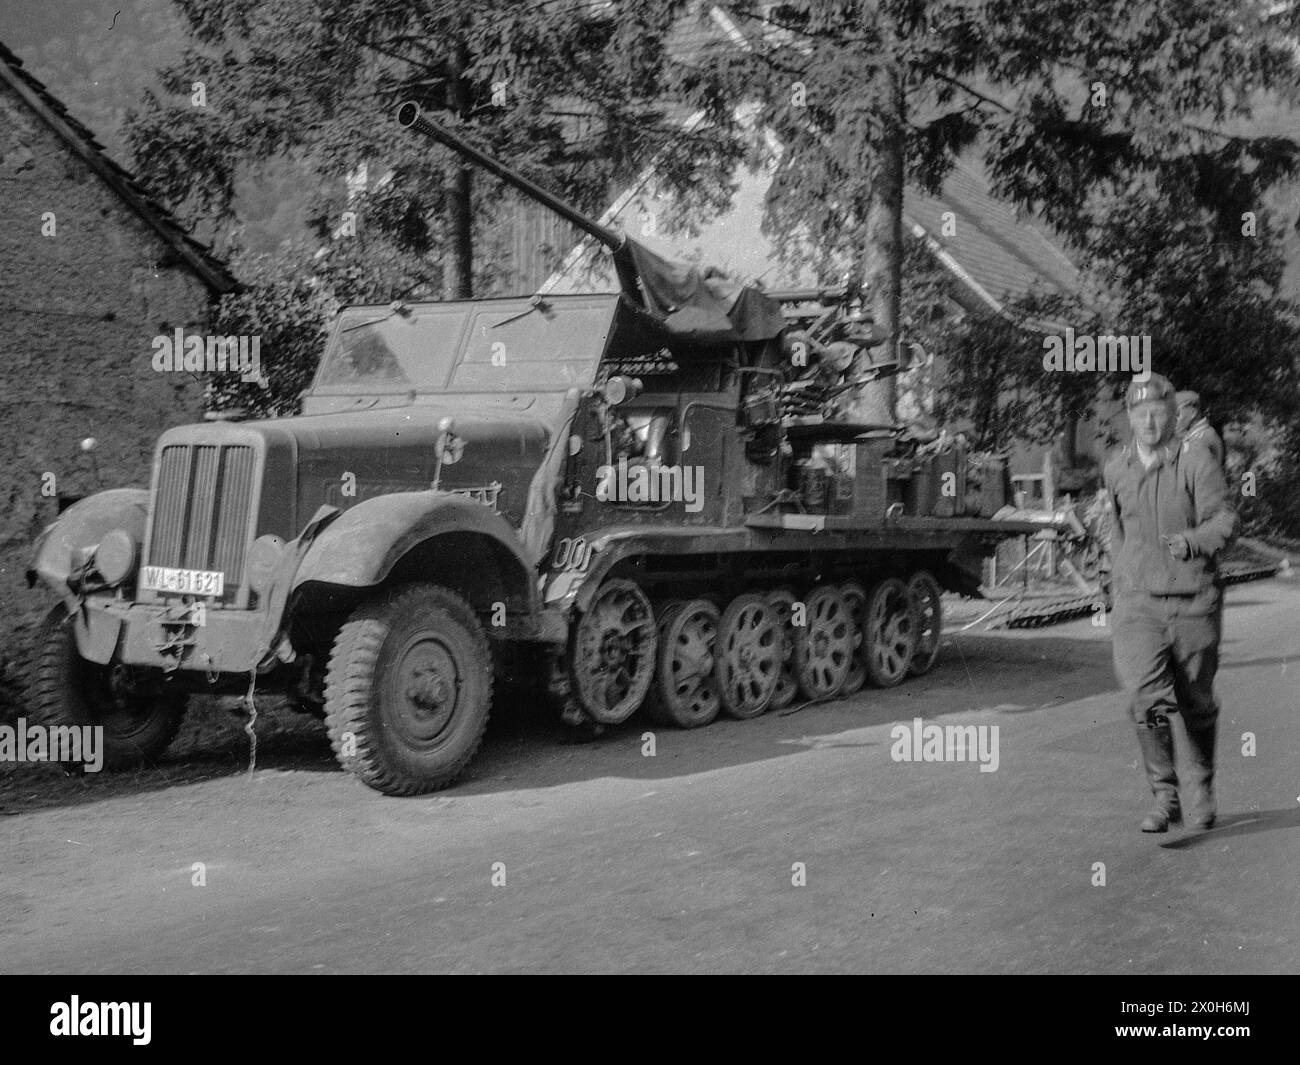 A Wehrmacht half-track vehicle with SD Kfz 11 with a 3.7cm anti-aircraft gun. The picture was taken by a member of the 154th Infantry Regiment / 58th Infantry Division, in France. [automated translation] Stock Photo